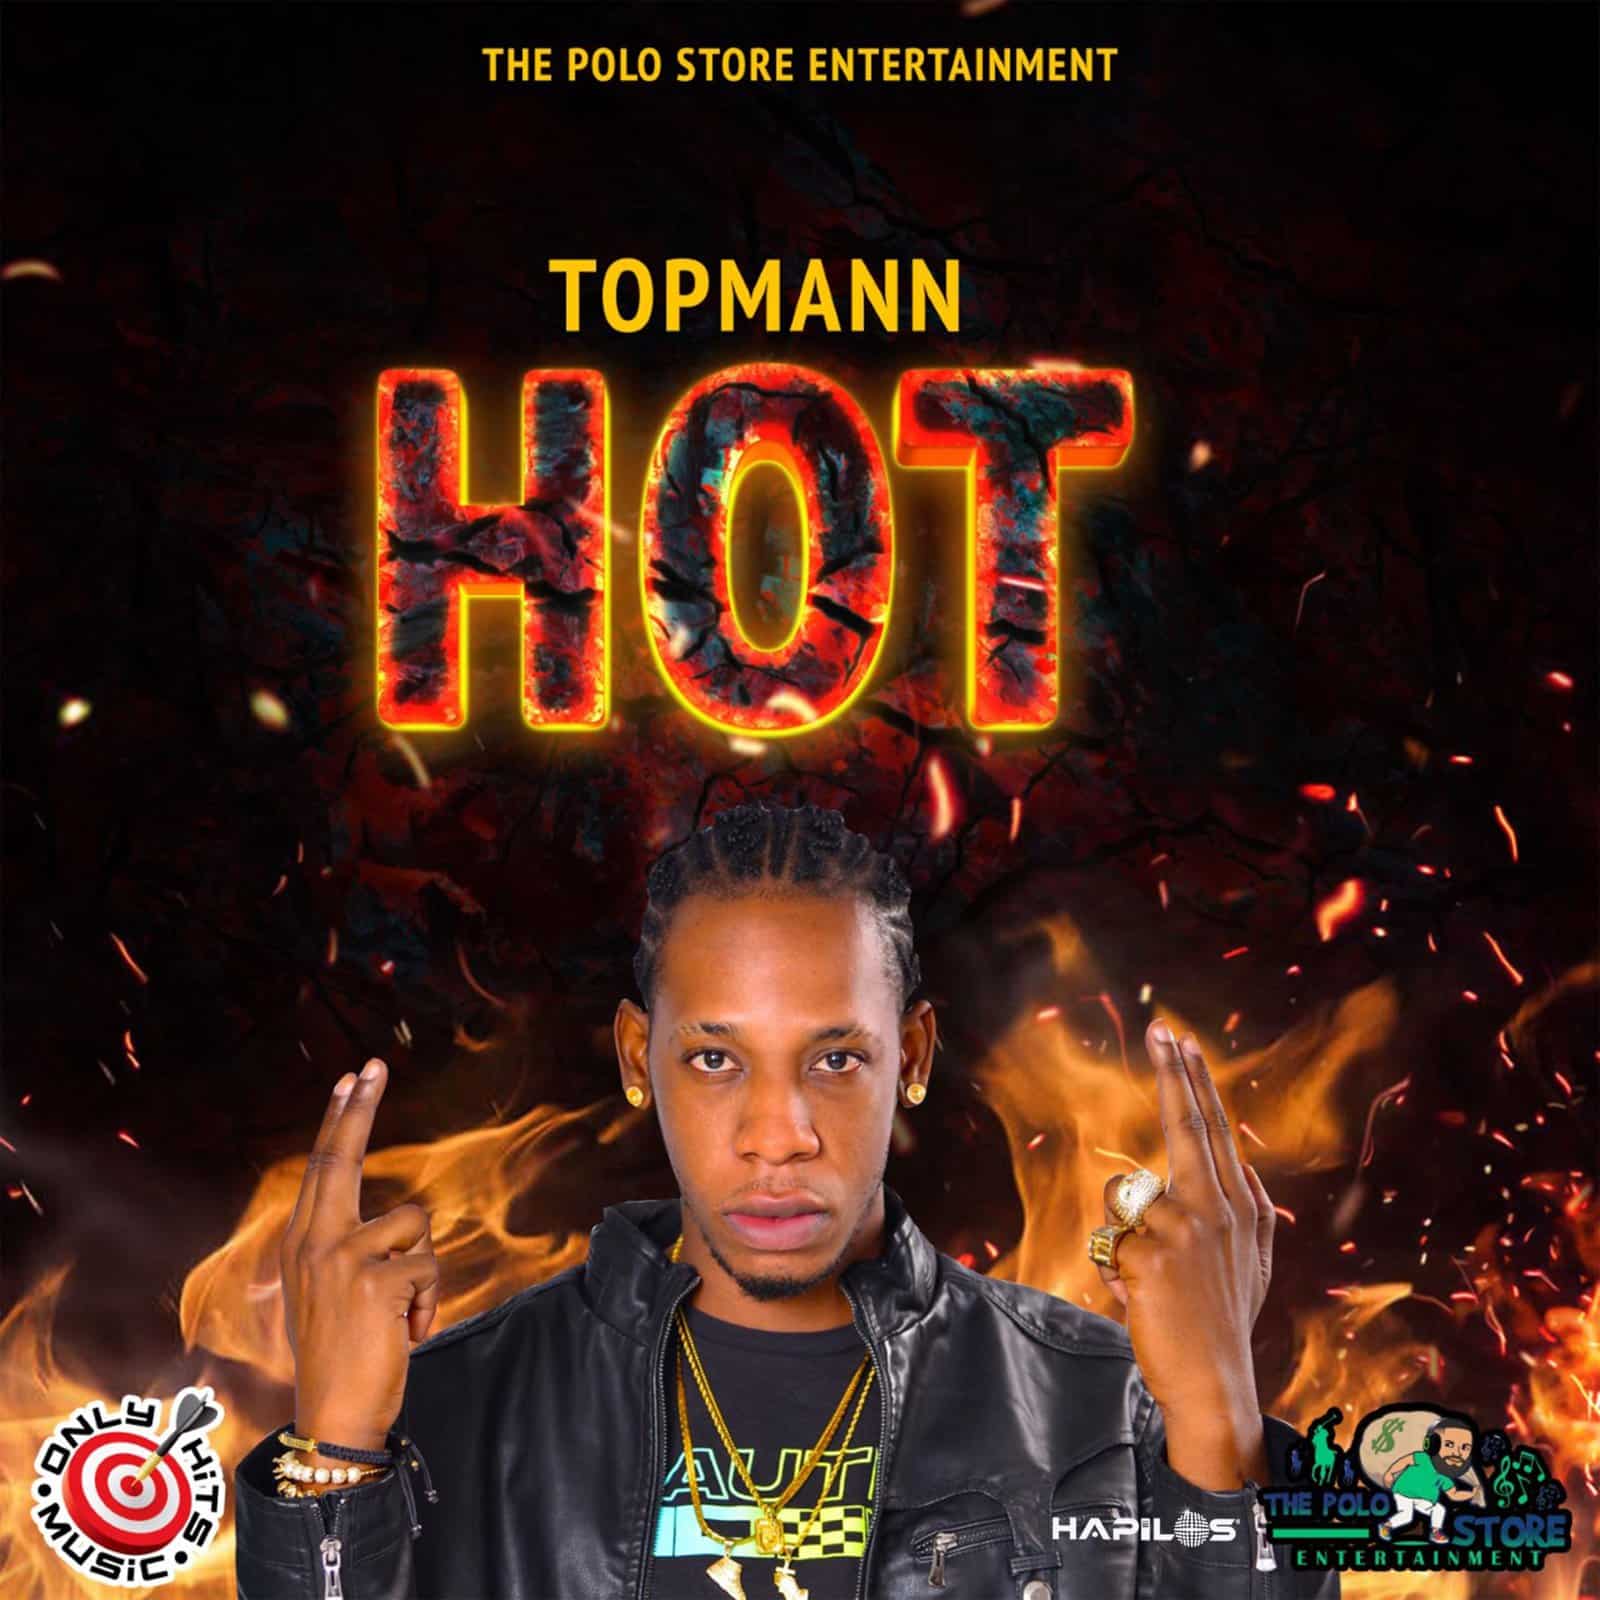 Topmann - Hot - The Polo Store Entertainment / Only Hits Music